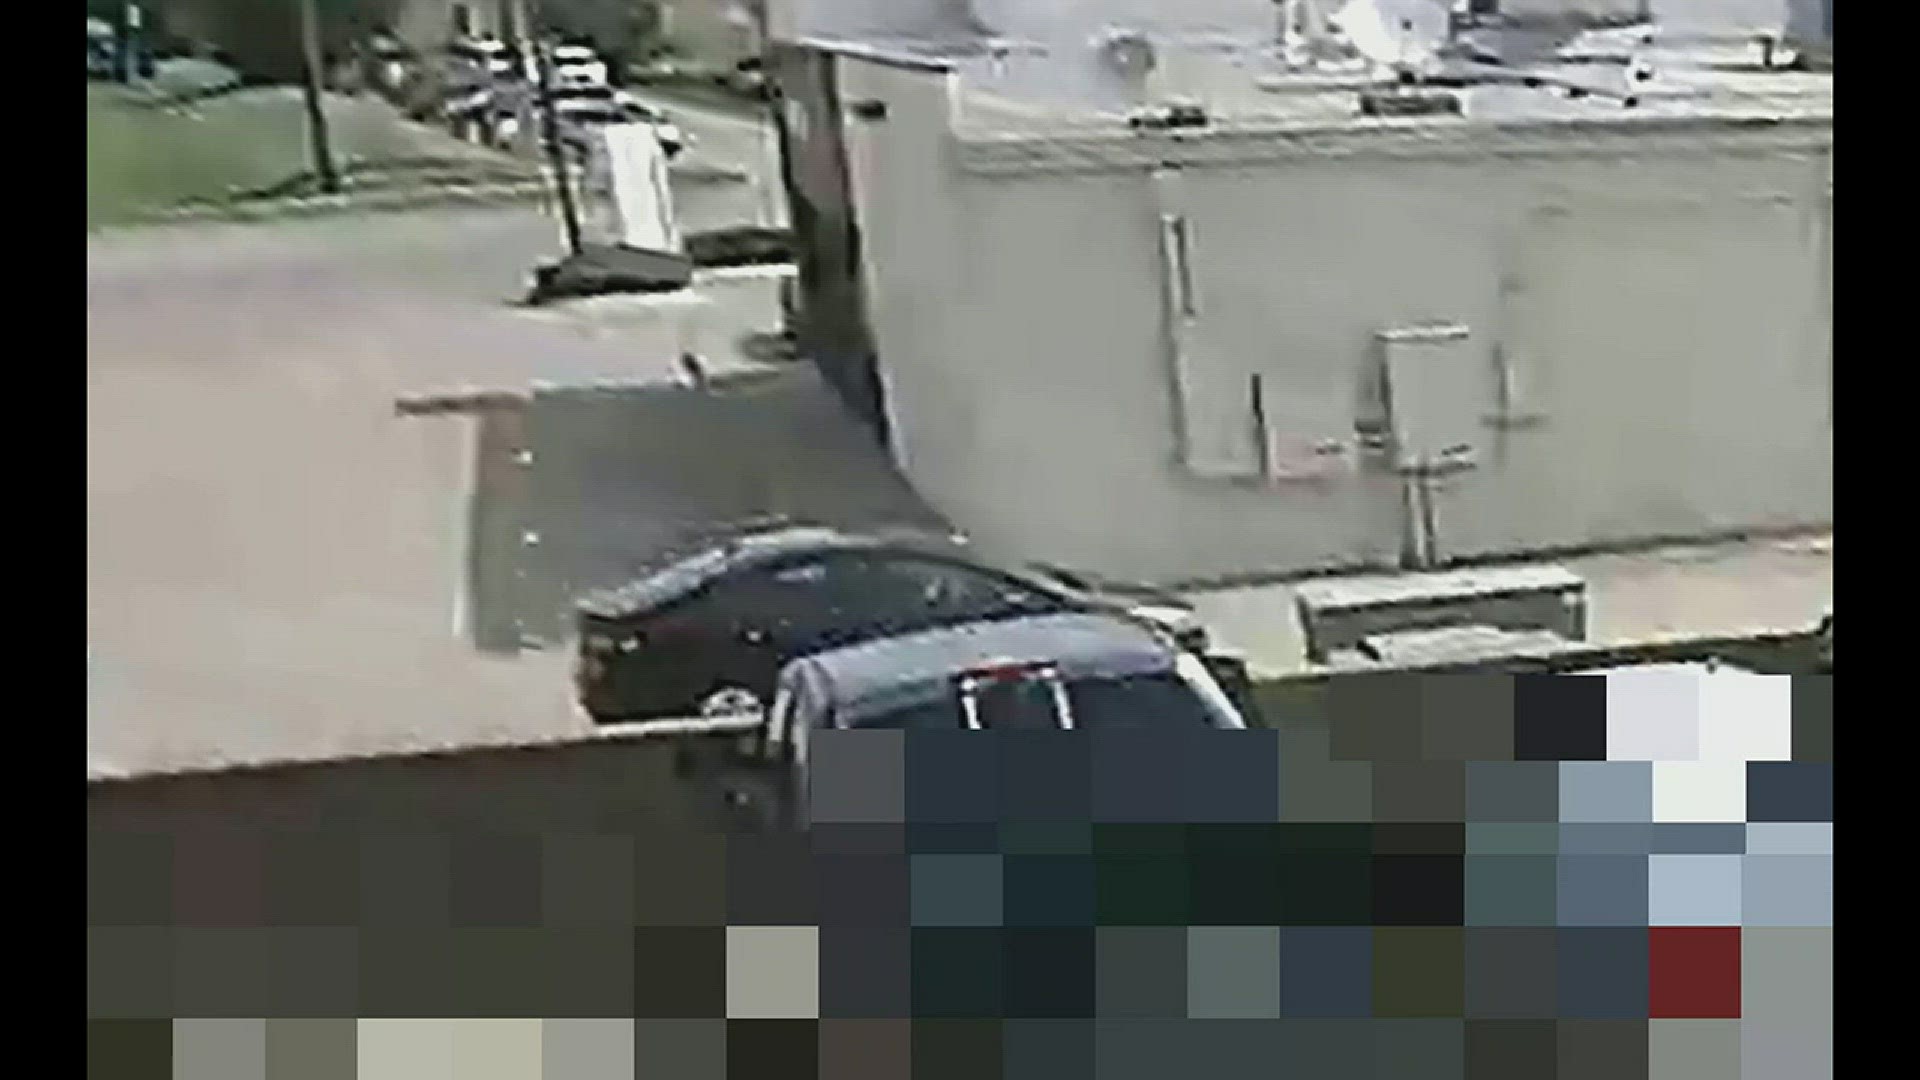 The video shows the vehicle driving behind a row of businesses where a Garland child was sexually assaulted, police said.